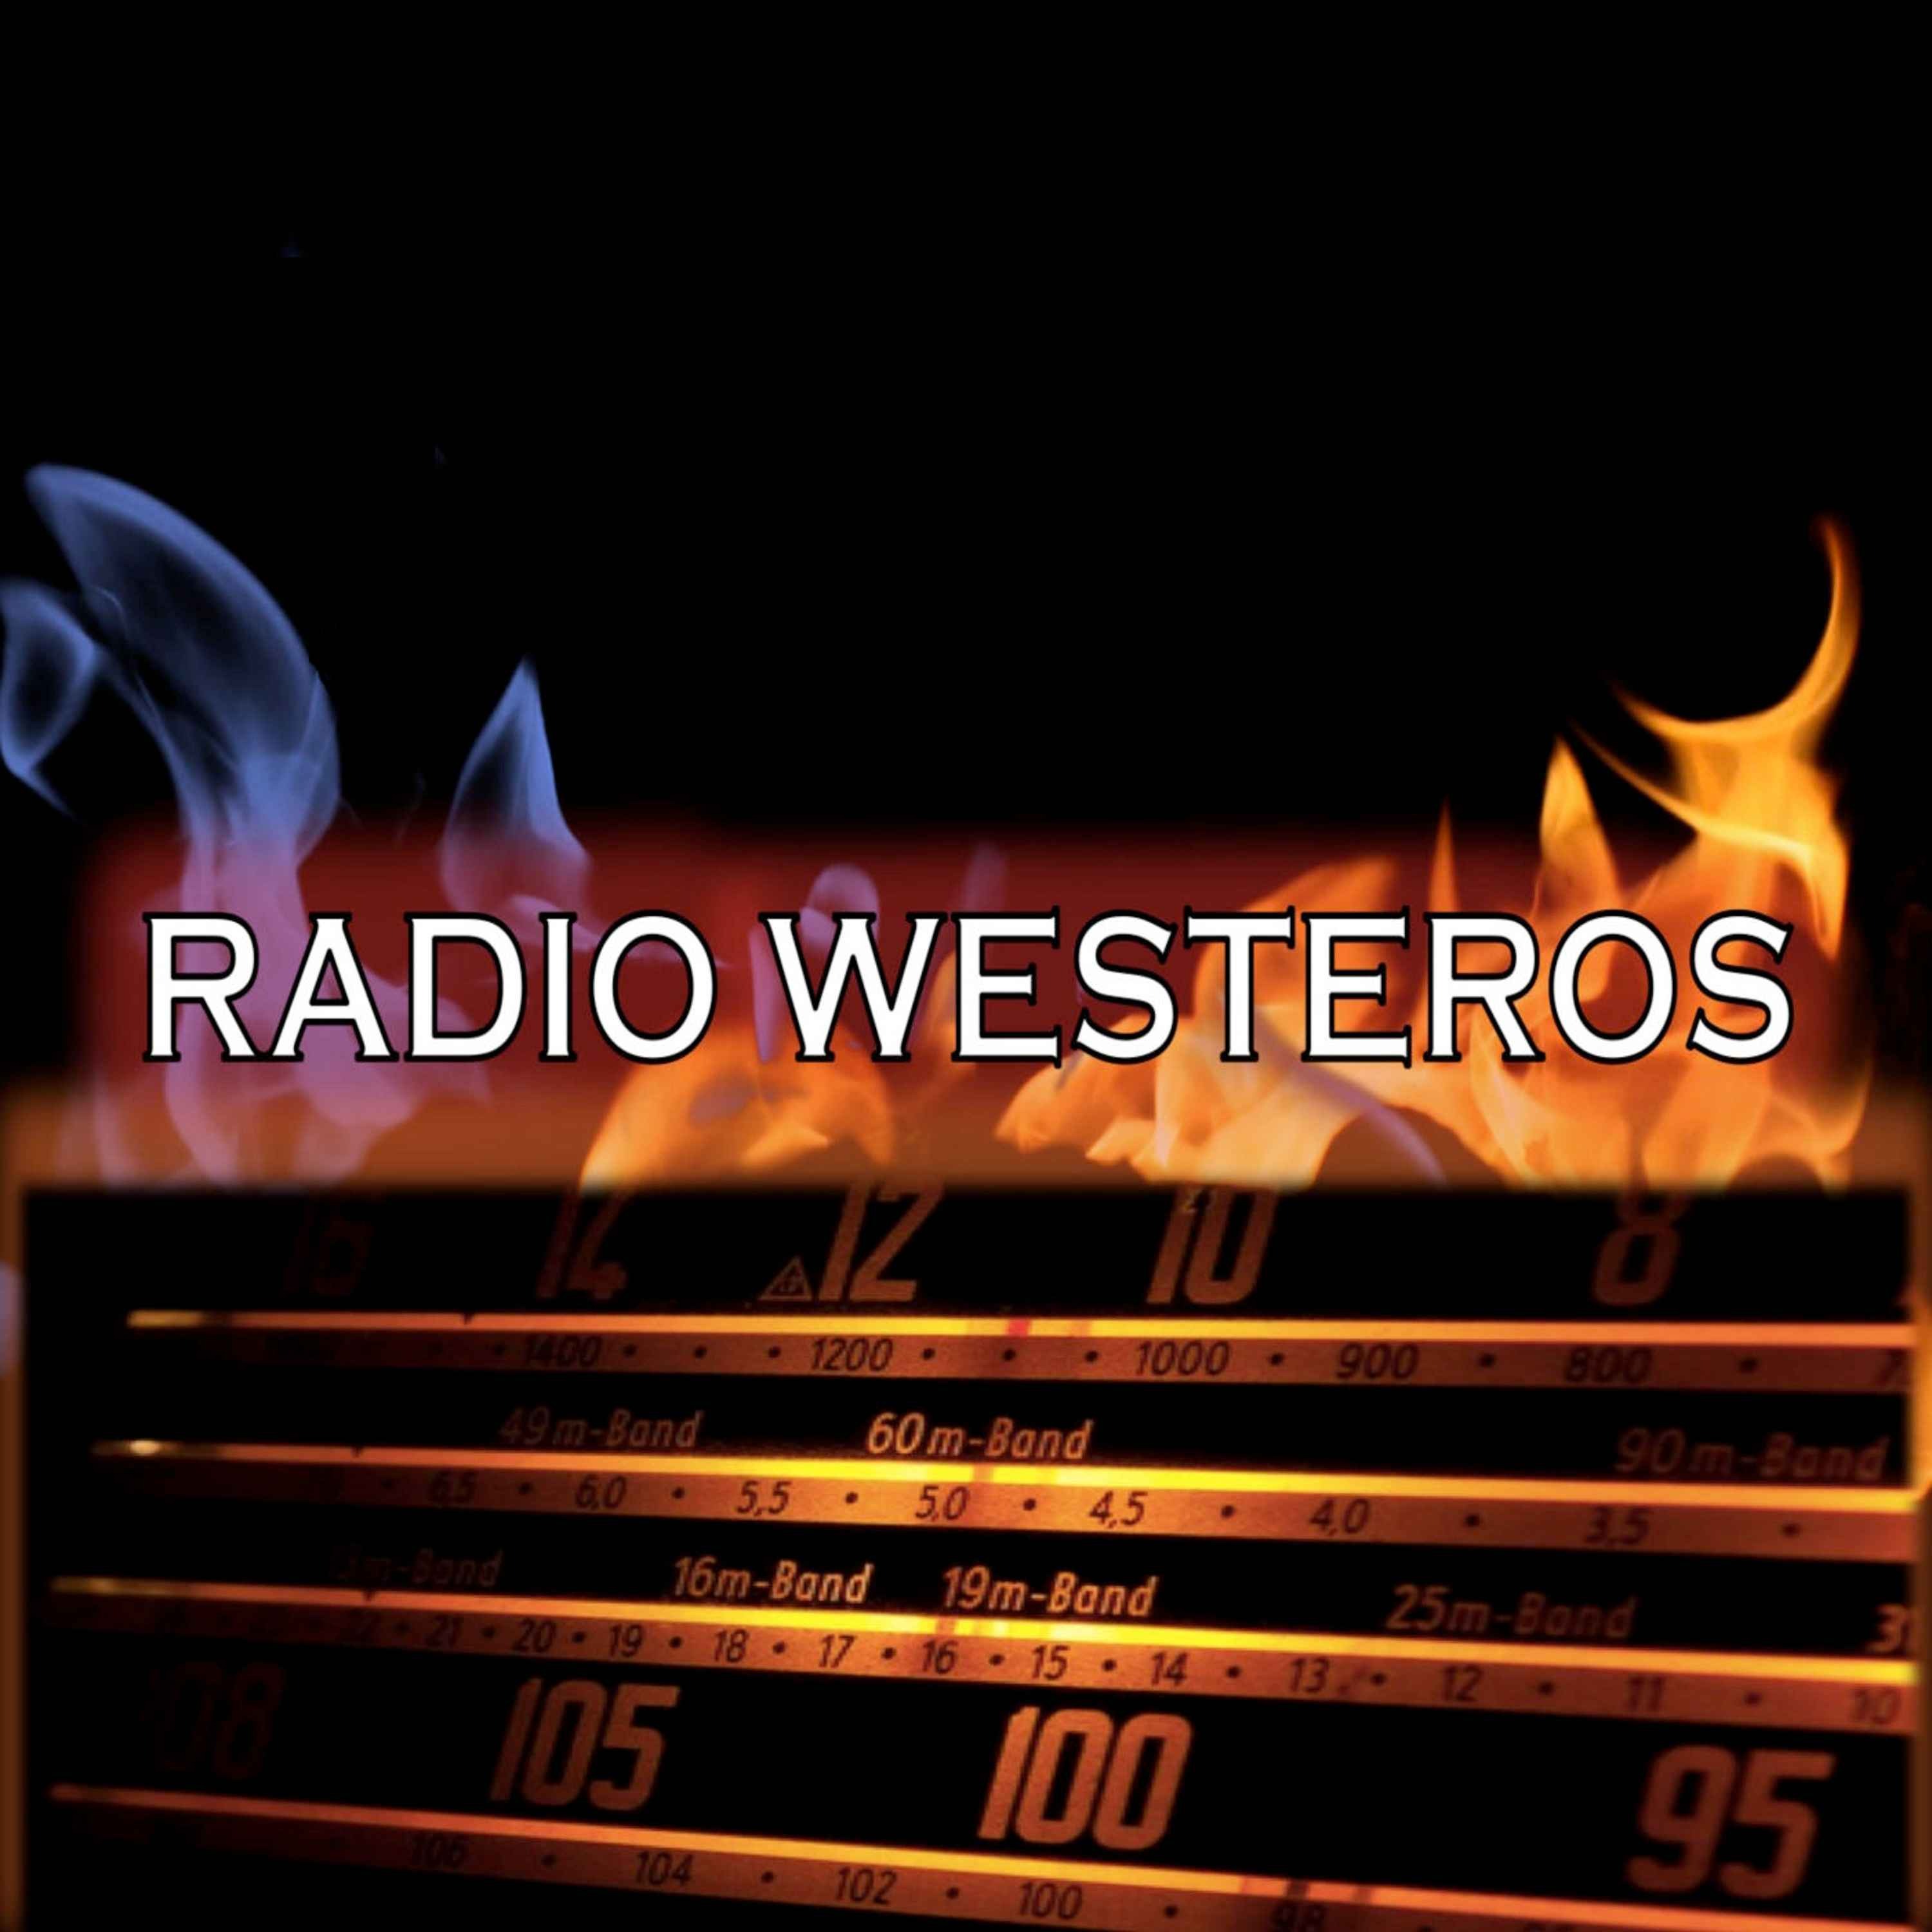 Radio Westeros E83 - w/History of Westeros - Dance of the Dragons, part 6